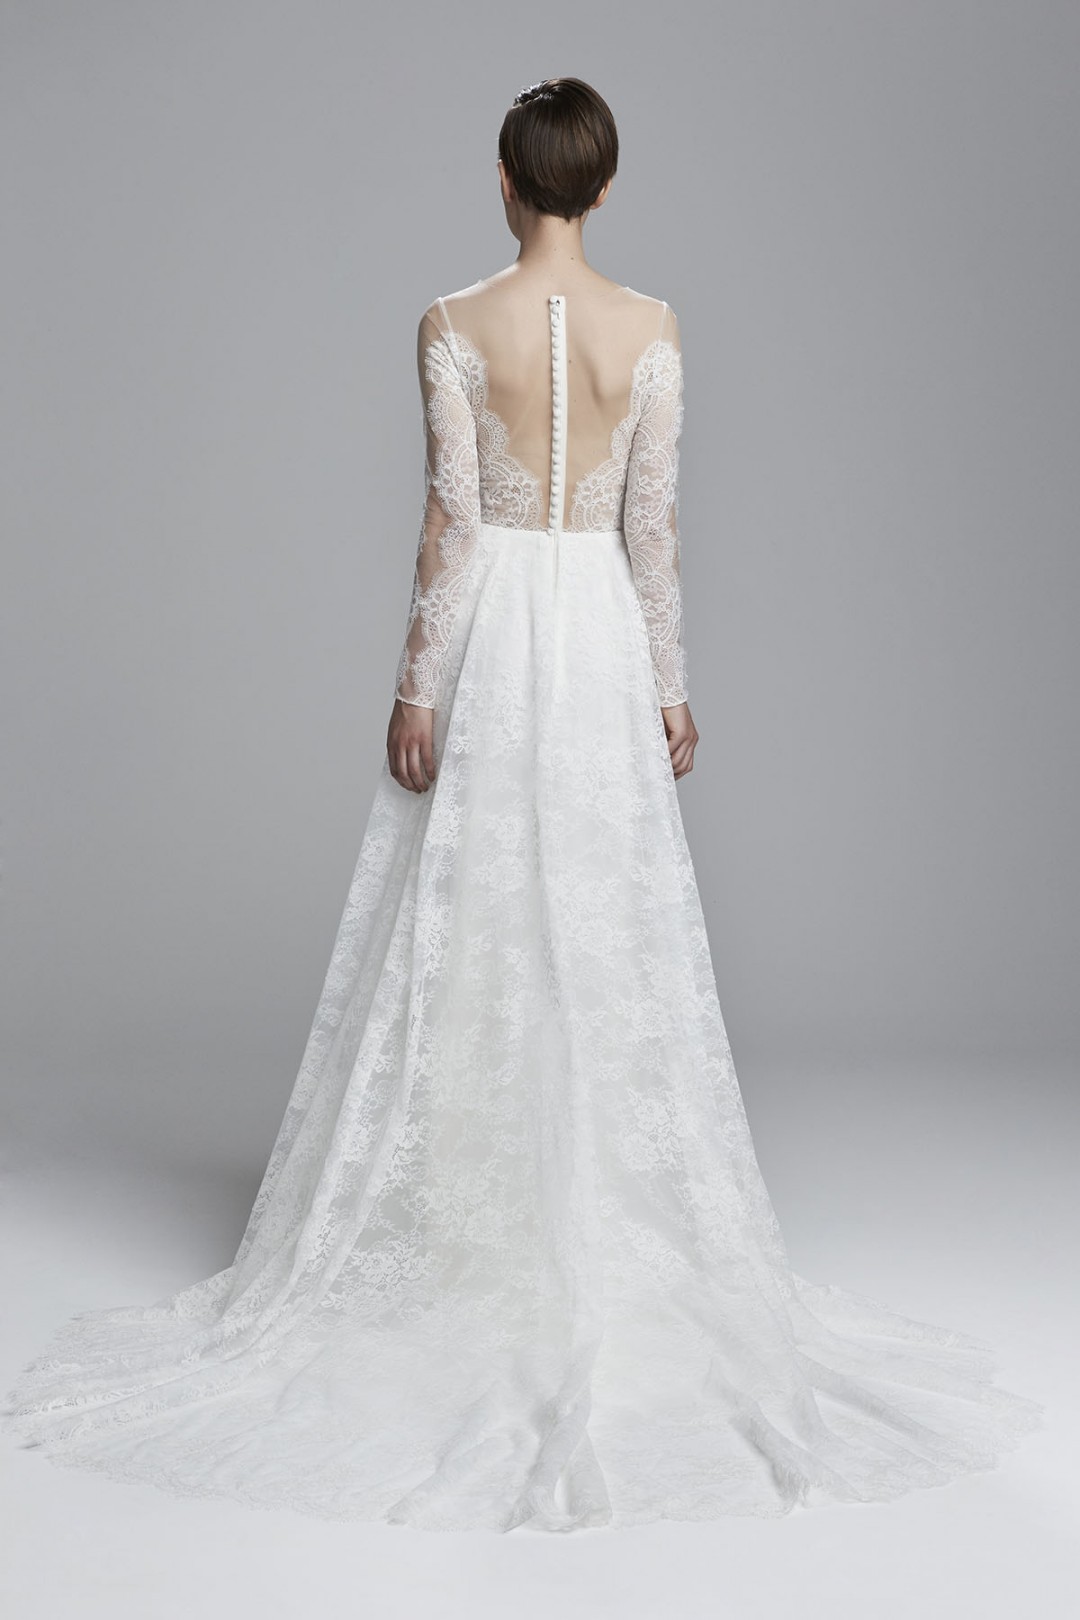 This romantic princess wedding dress crafted in Chantilly lace